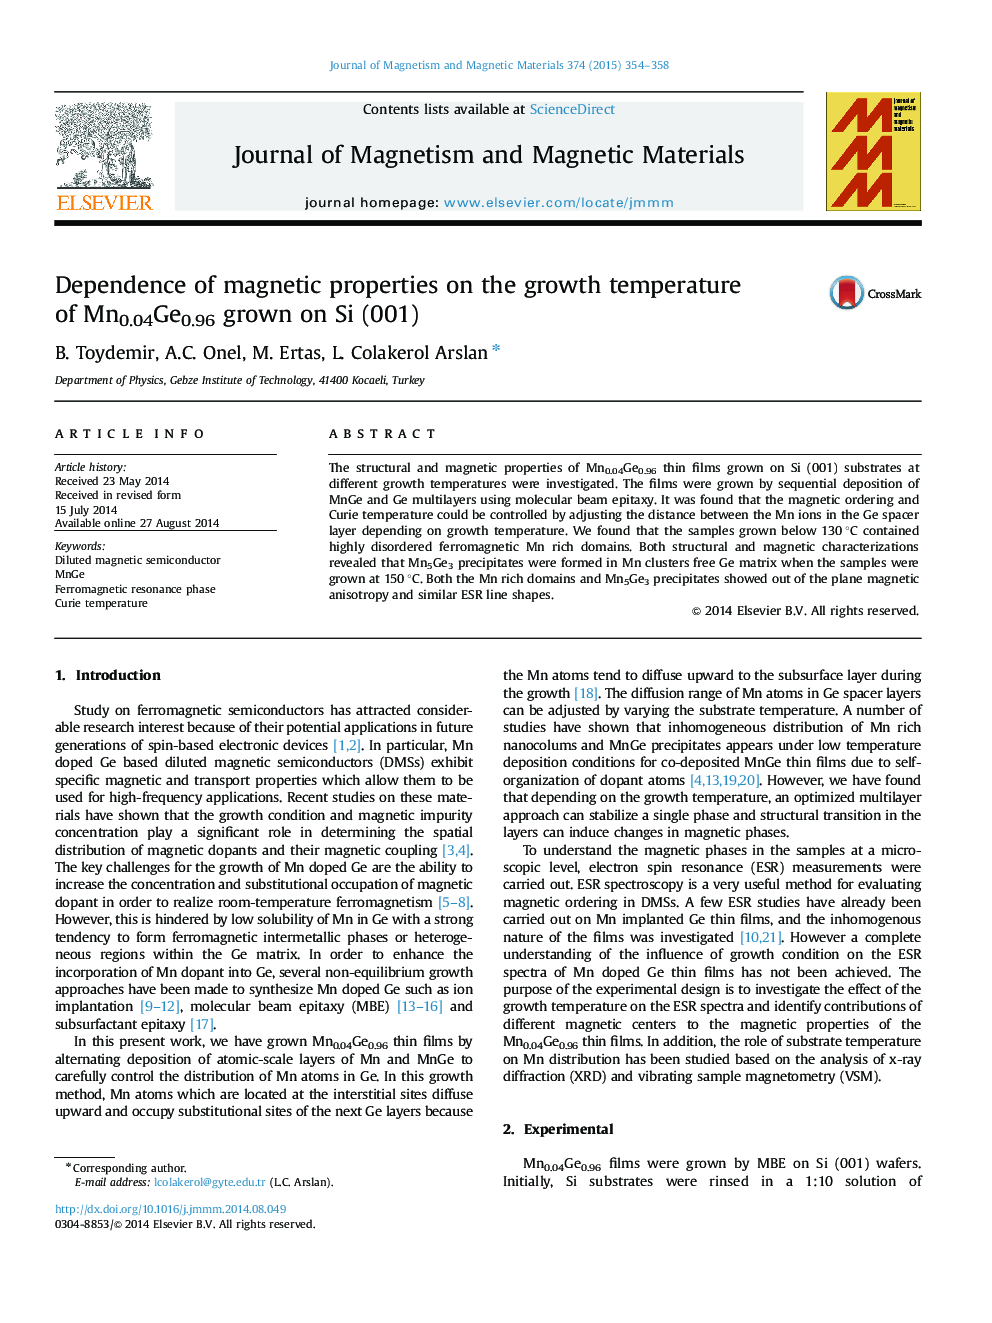 Dependence of magnetic properties on the growth temperature of Mn0.04Ge0.96 grown on Si (001)